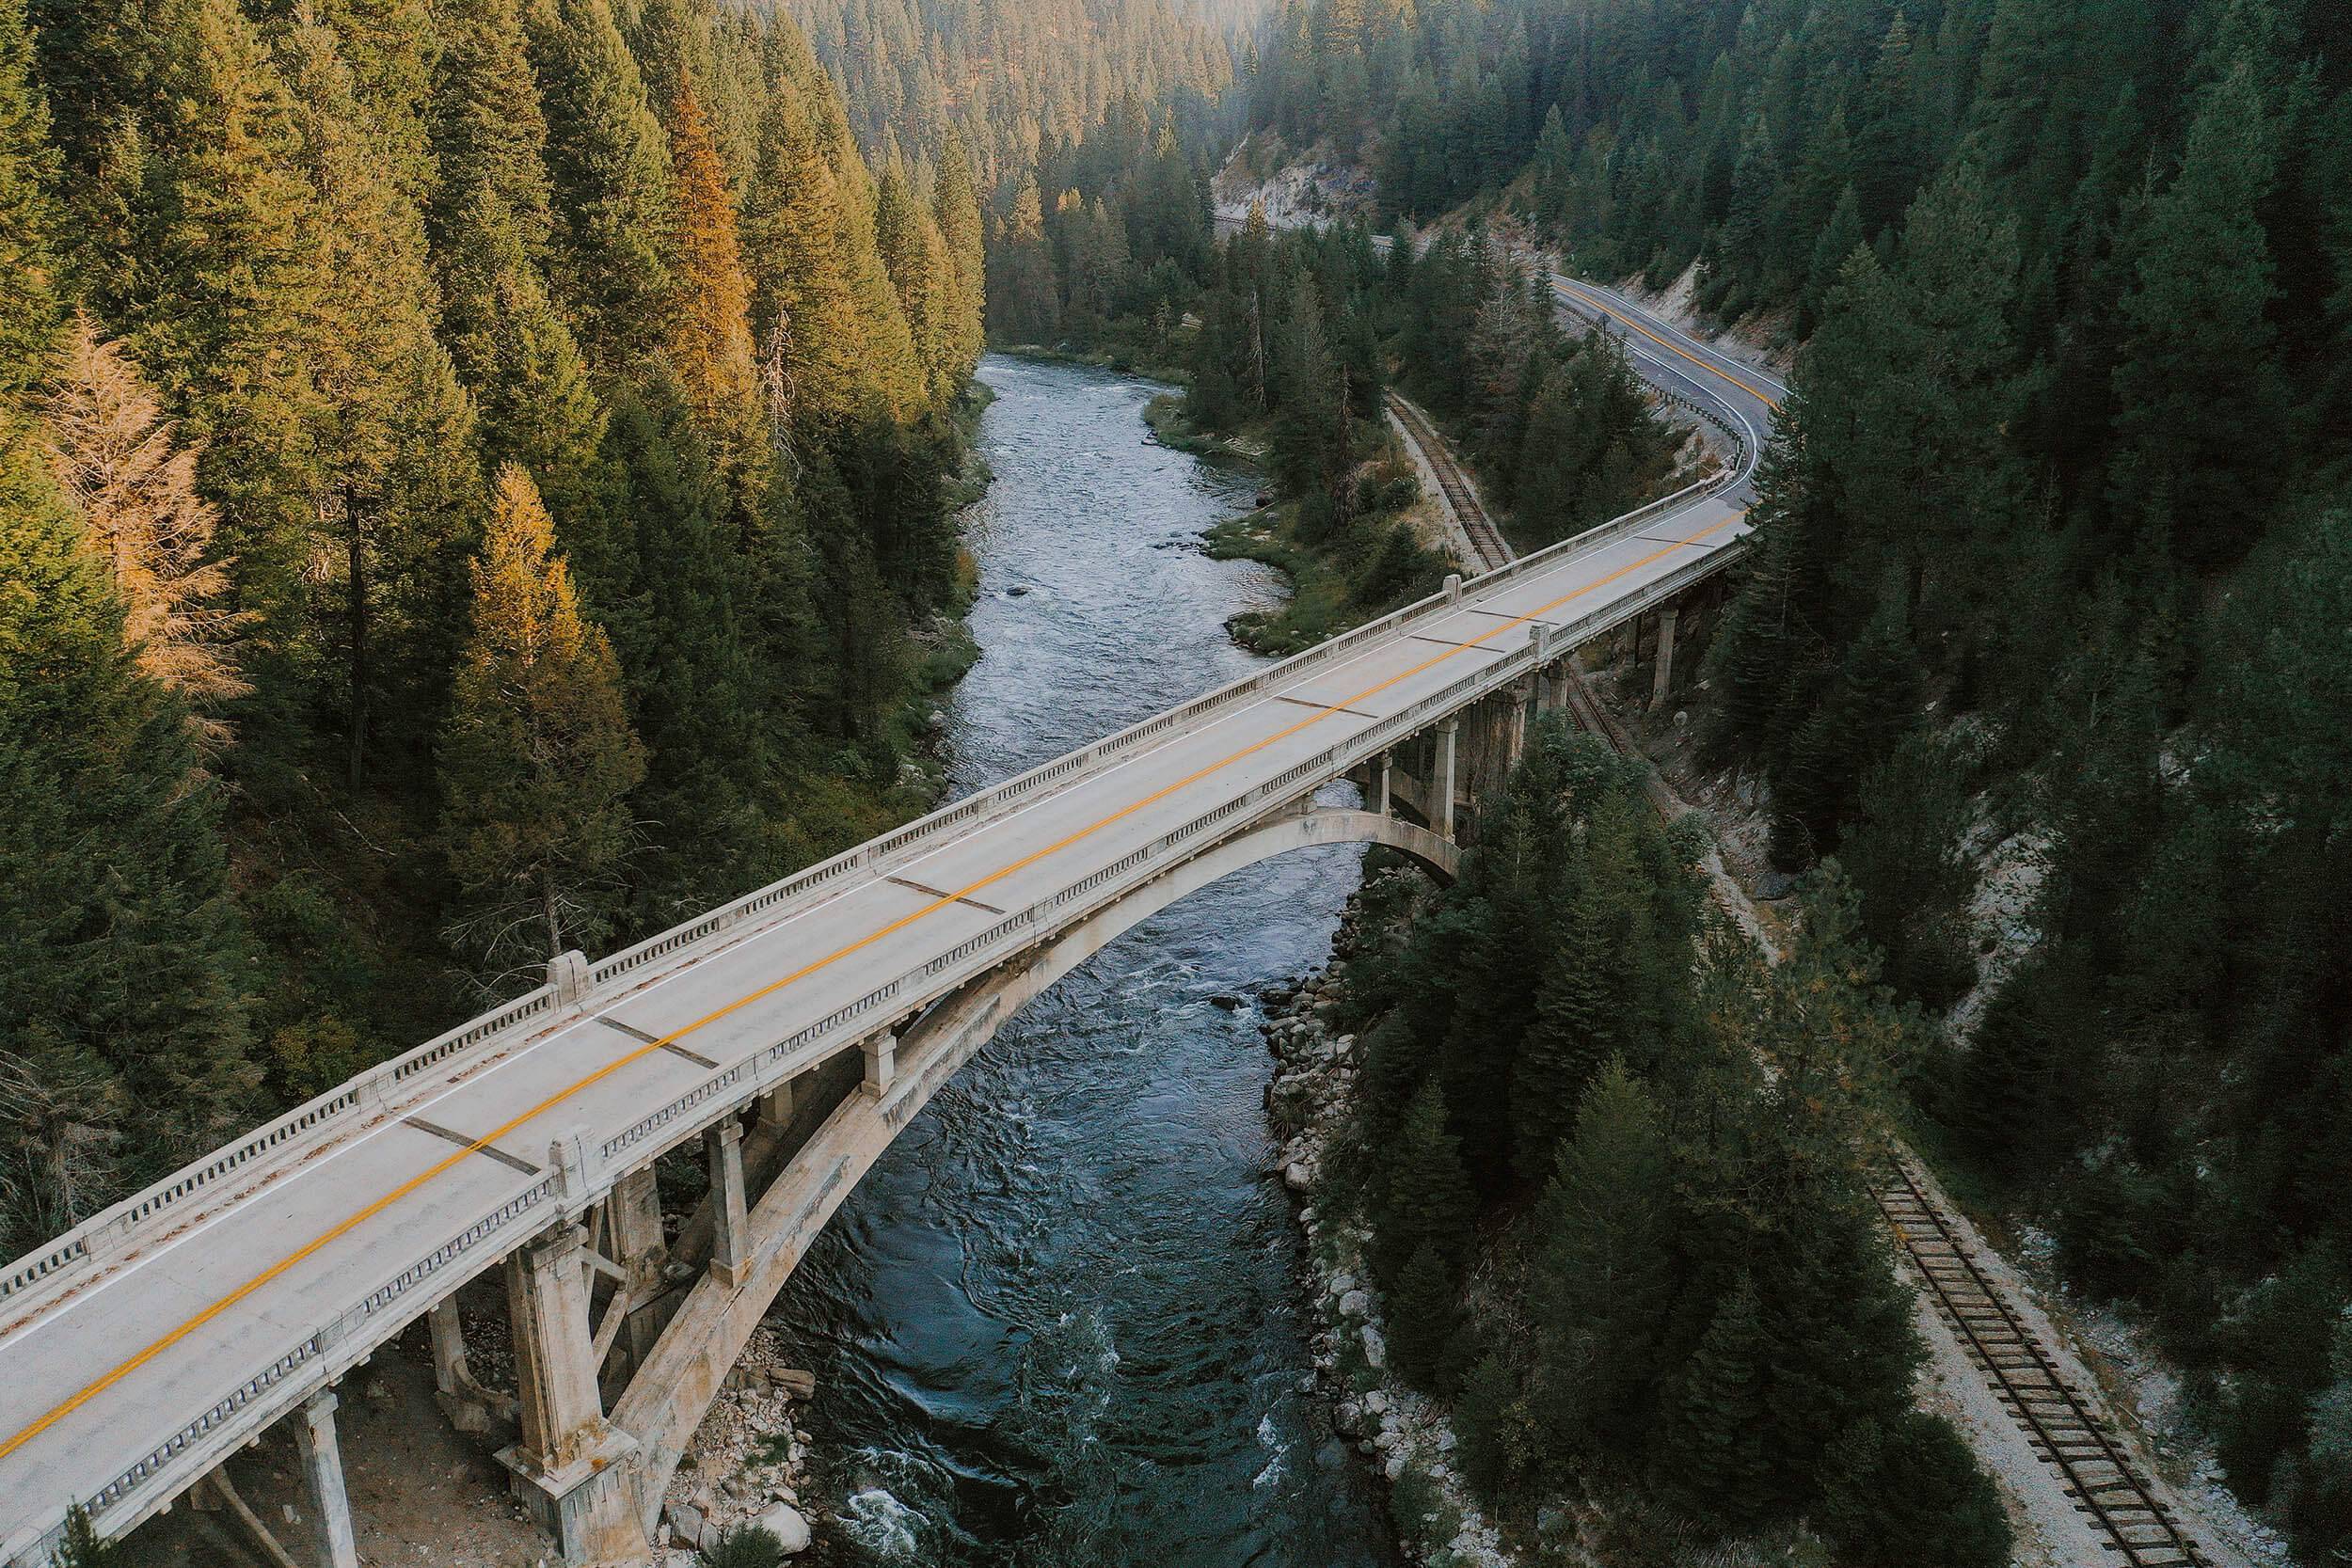 a bridge crossing over a river lined with trees